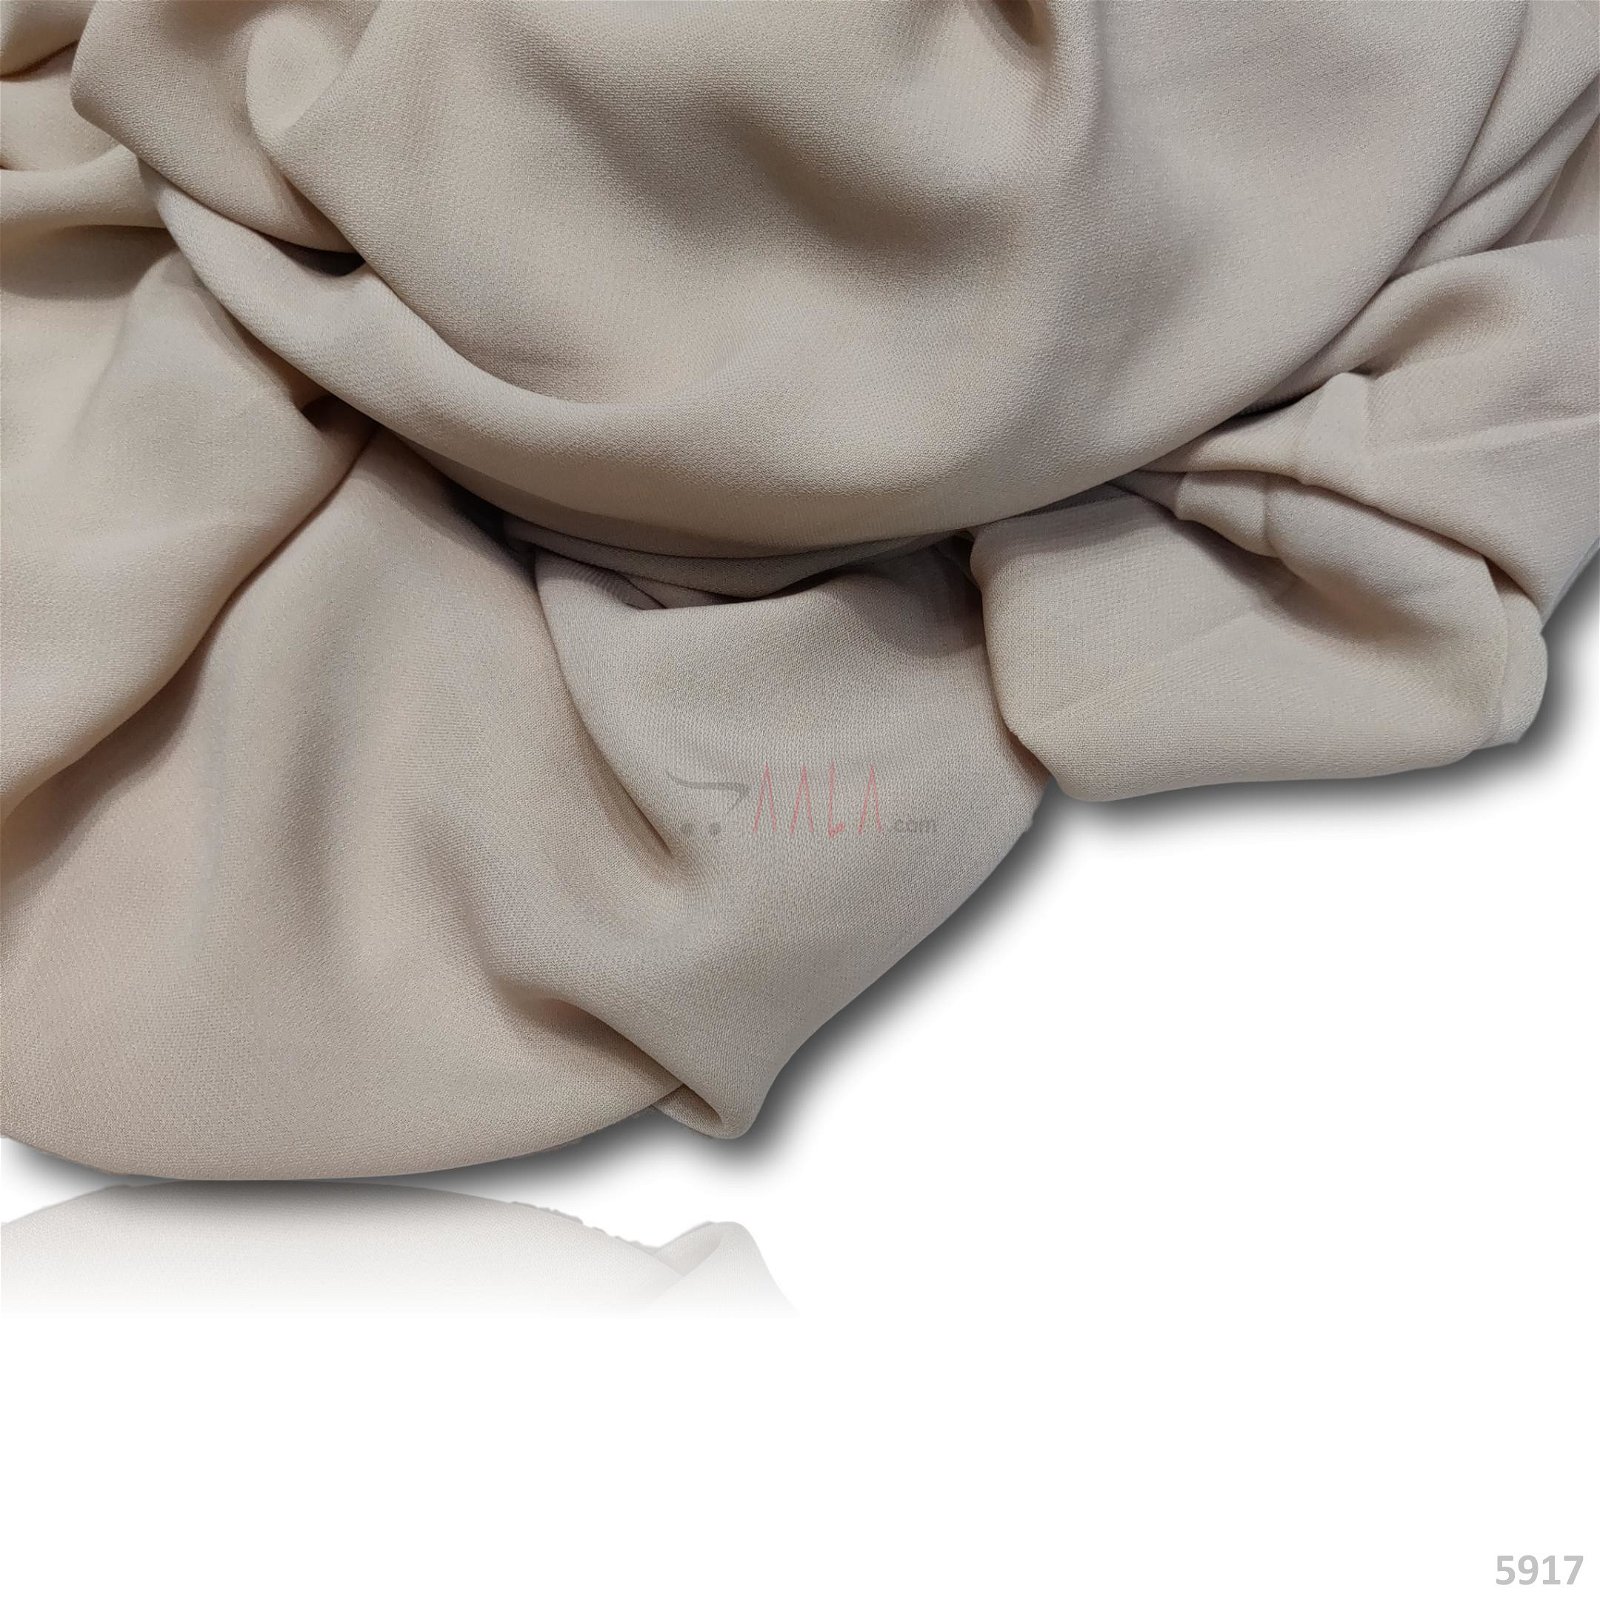 Moscow Double Georgette 58 Inches Dyed Per Metre #5917